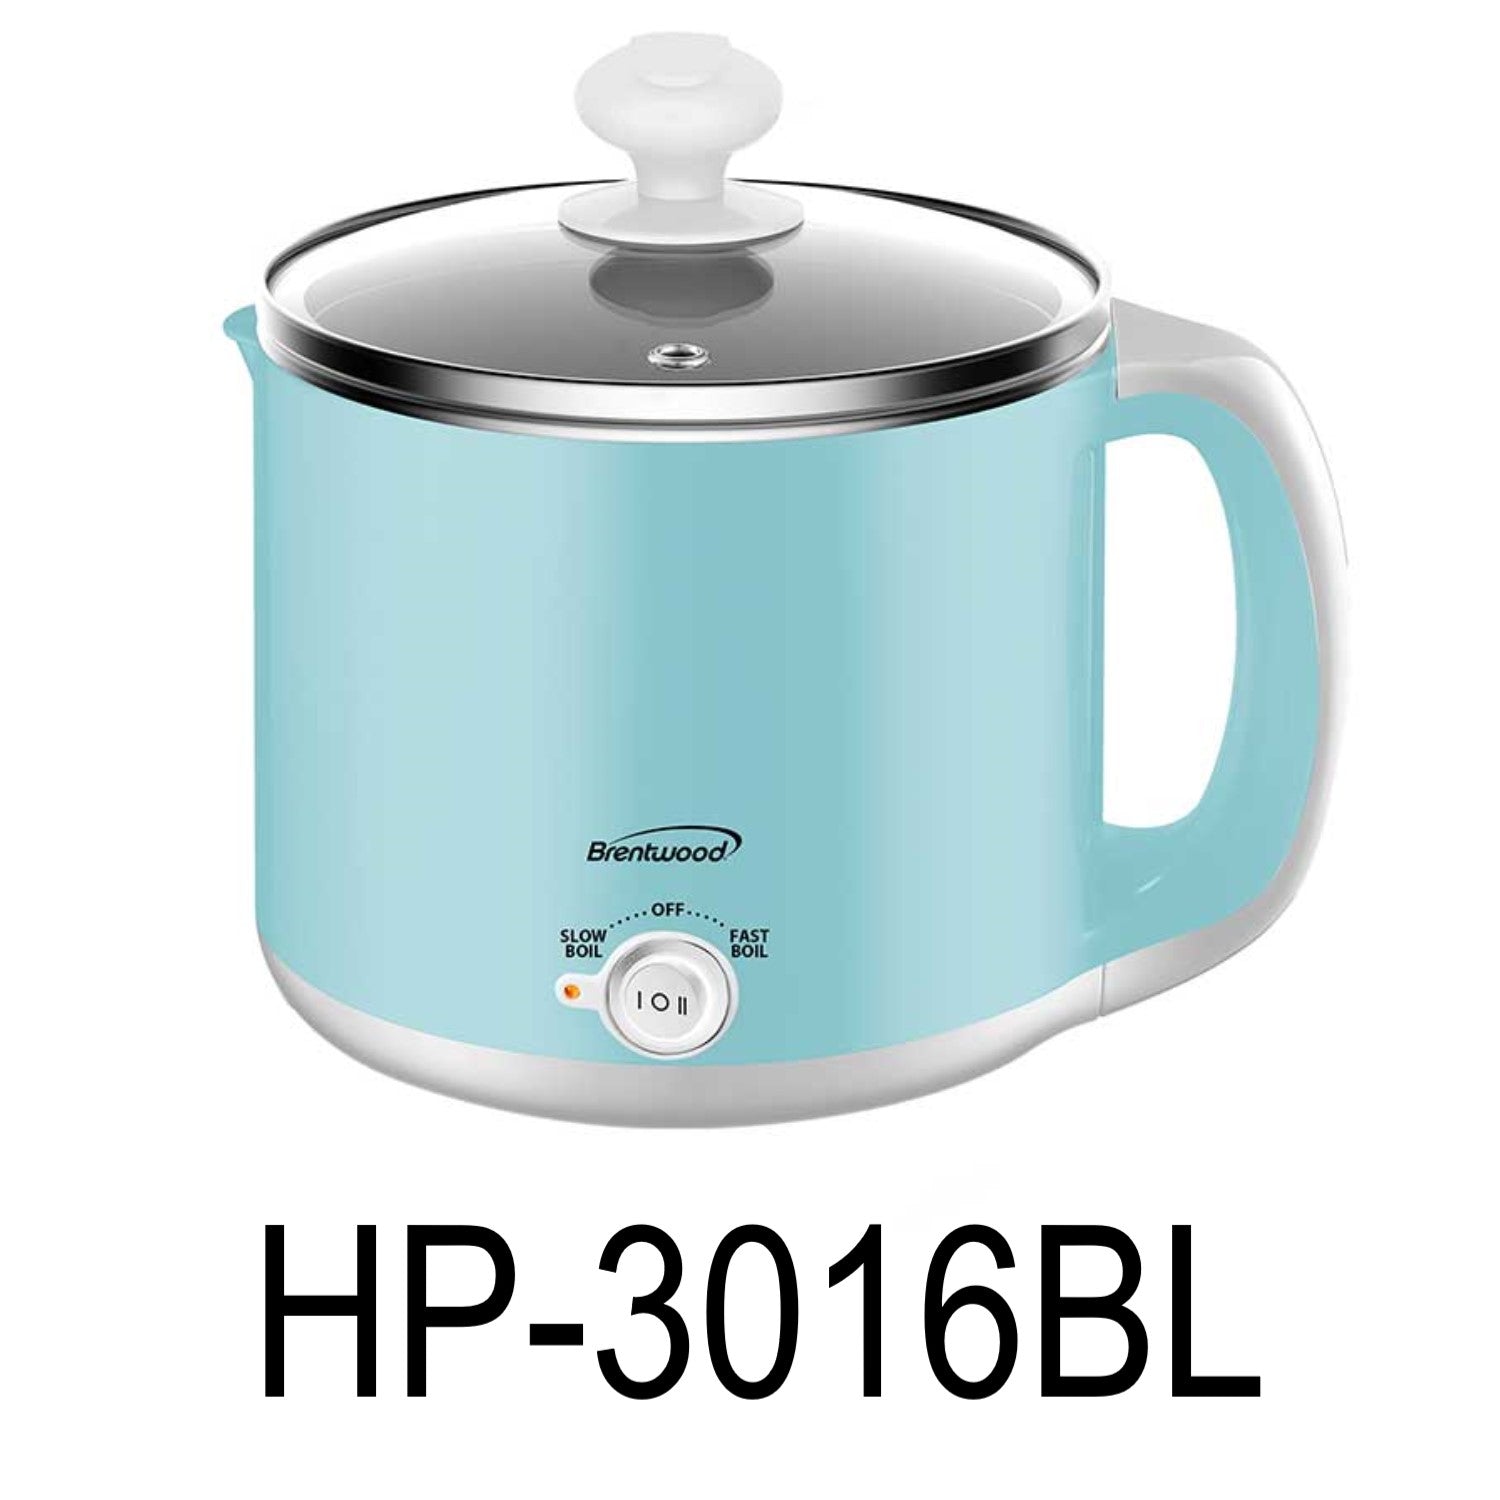 Brentwood 1.8 Quarts Stainless Steel Electric Tea Kettle